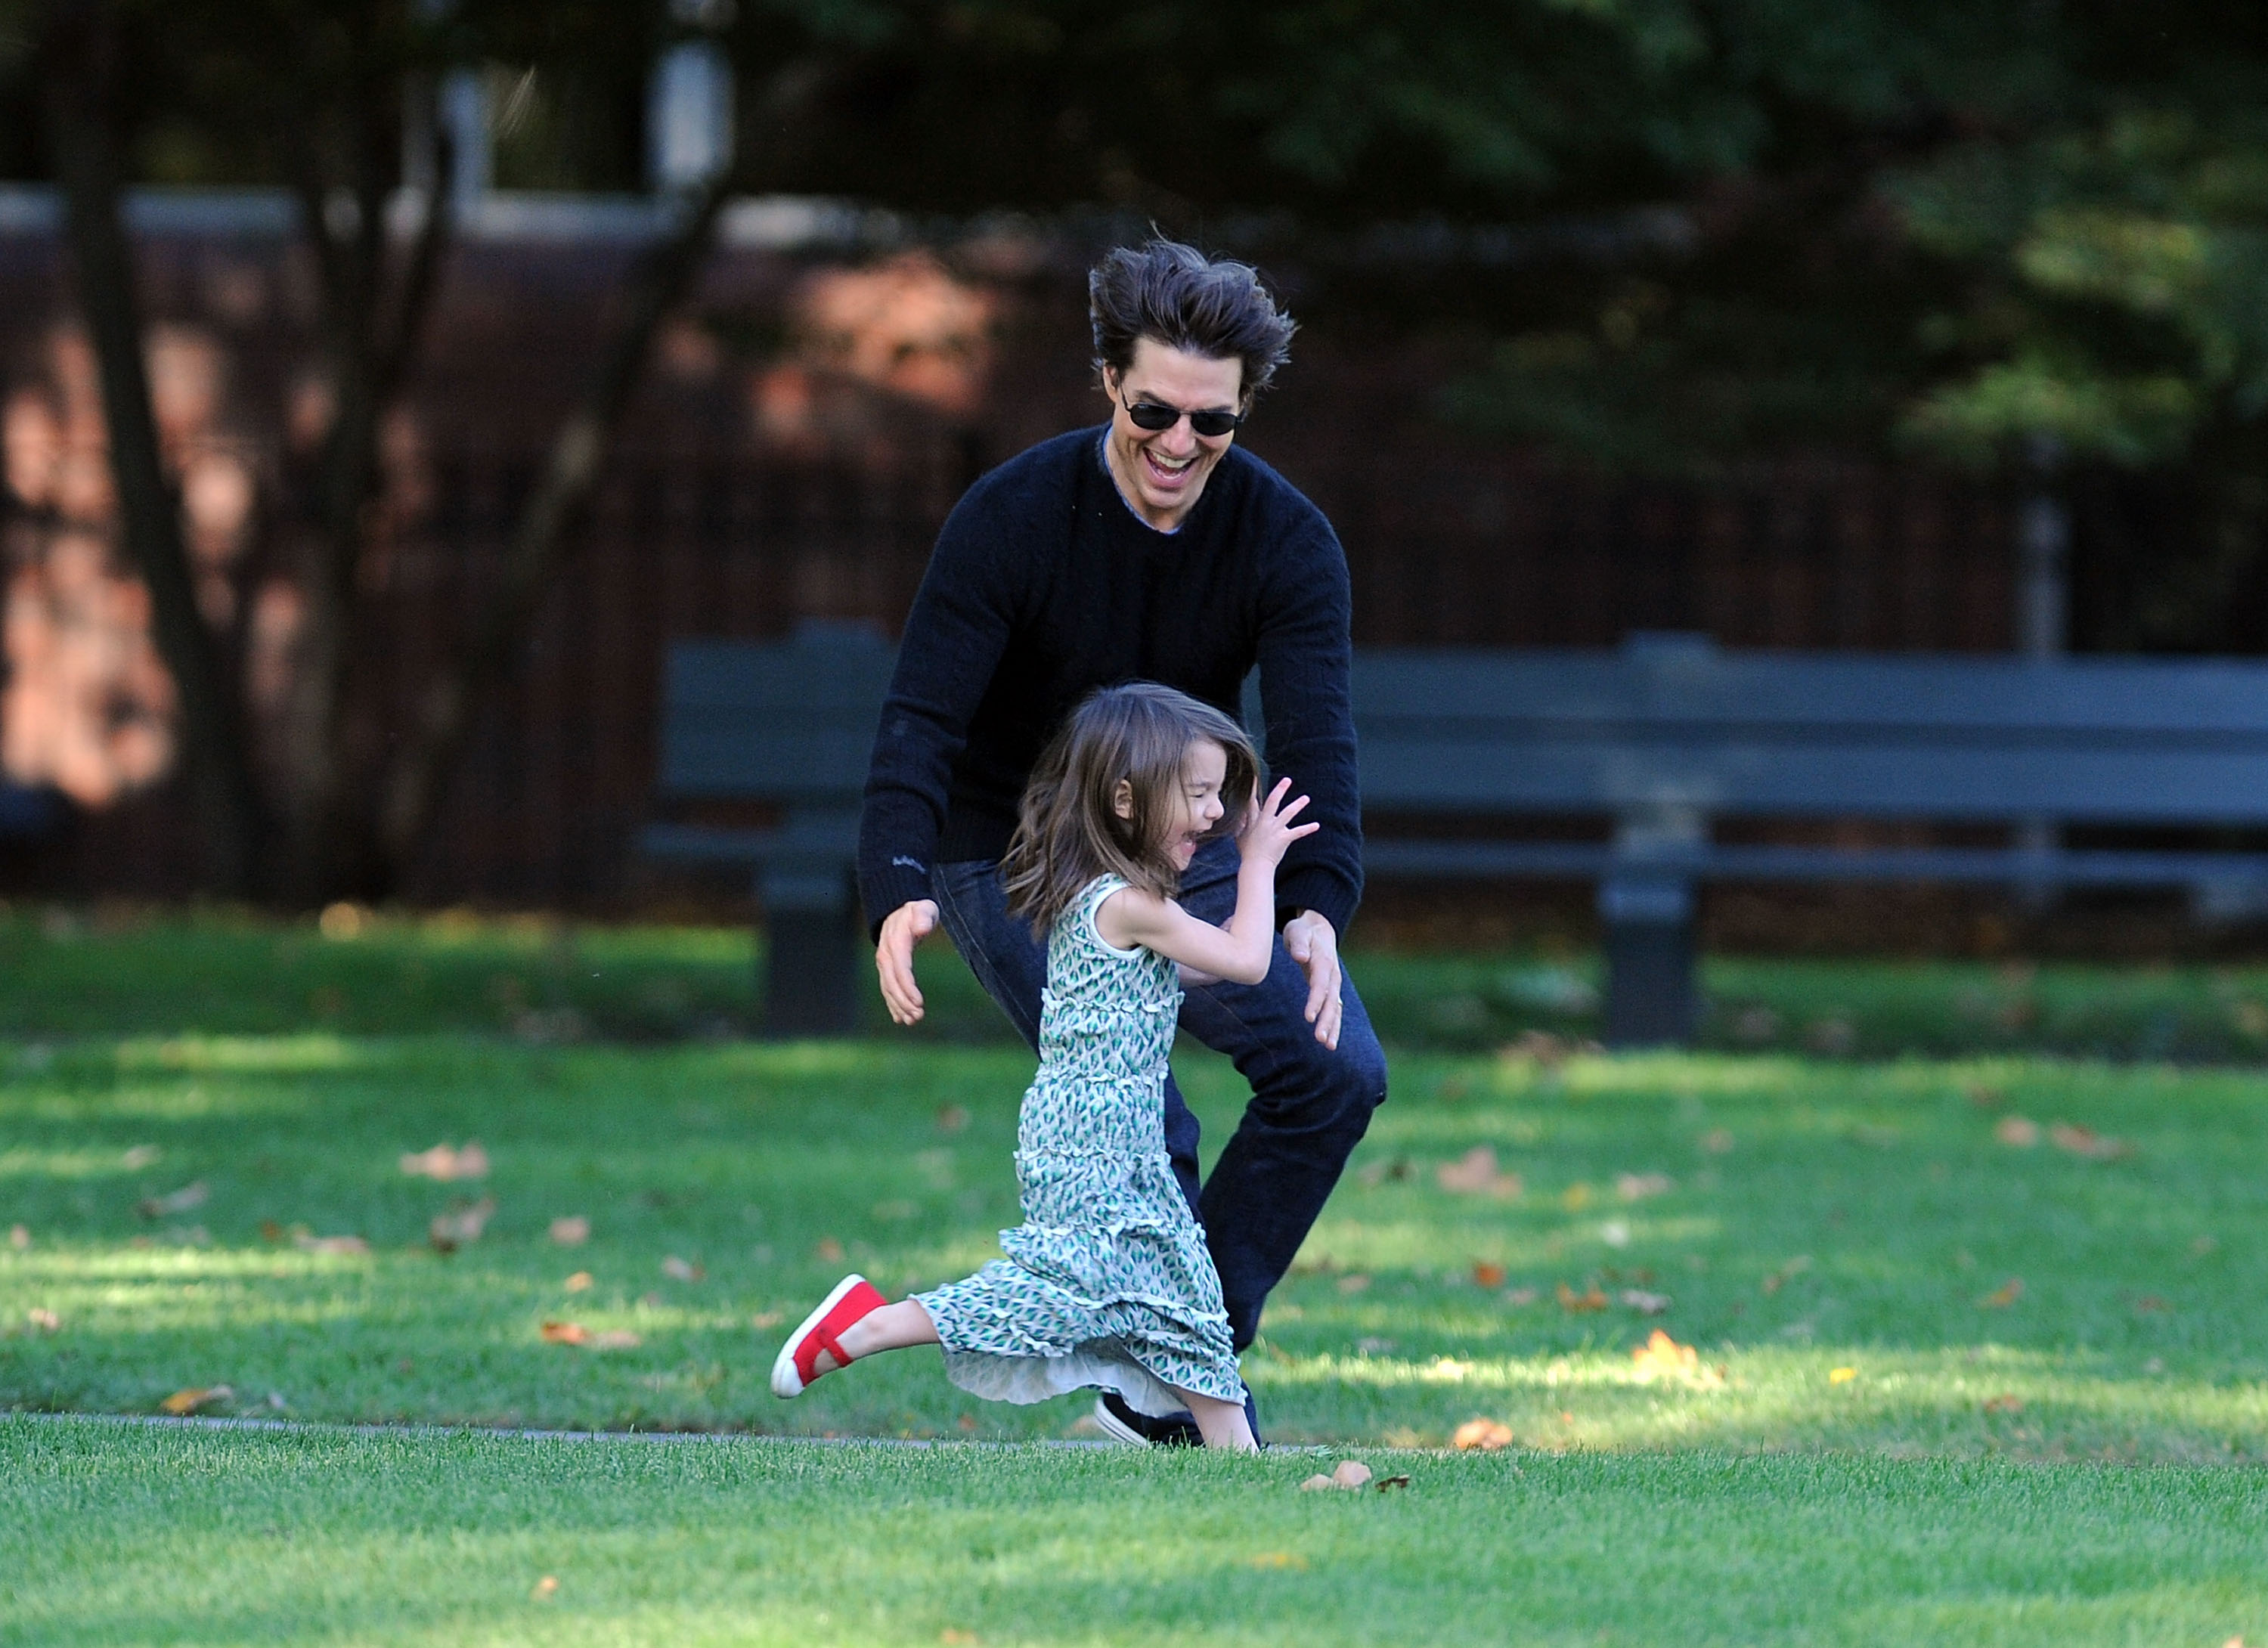 Tom and Suri Cruise at Charles River Basin on October 10, 2009 in Cambridge, Massachusetts | Source: Getty Images